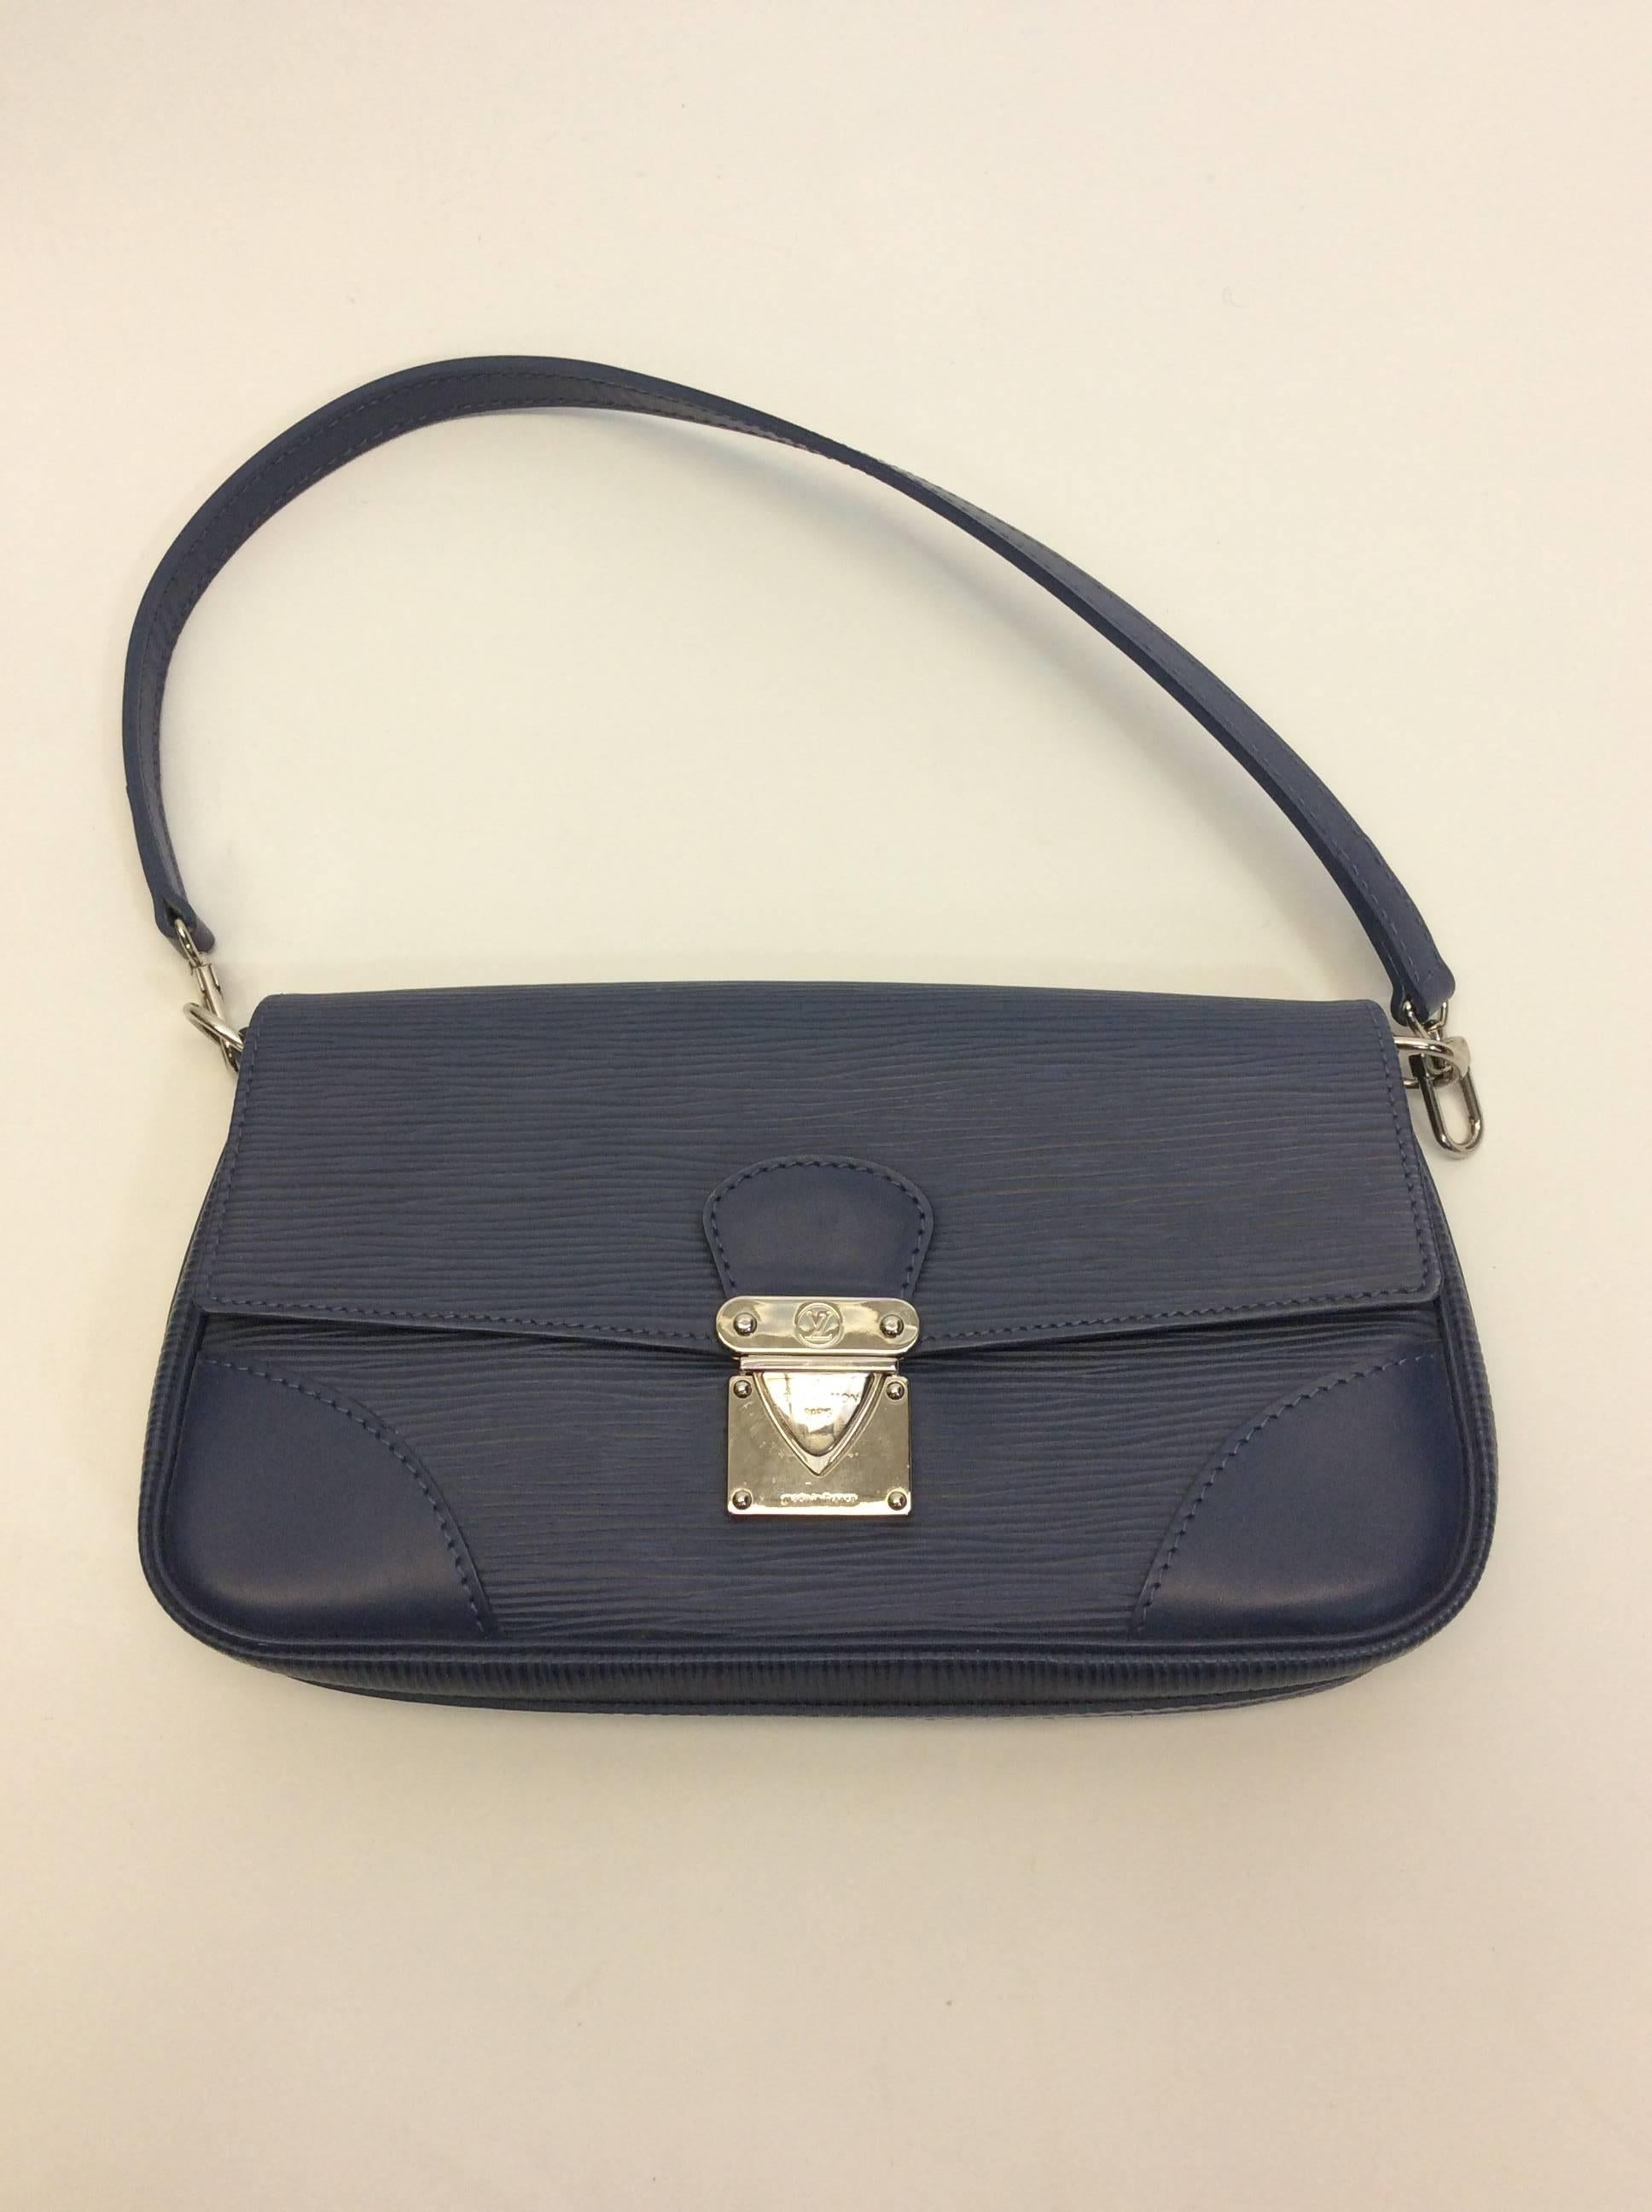 Louis Vuitton Epi Blue Leather Clutch
Epi leather exterior, lined interior
$399
Made in France
Silver hardware
Clasp closure
10 X 5 X 2